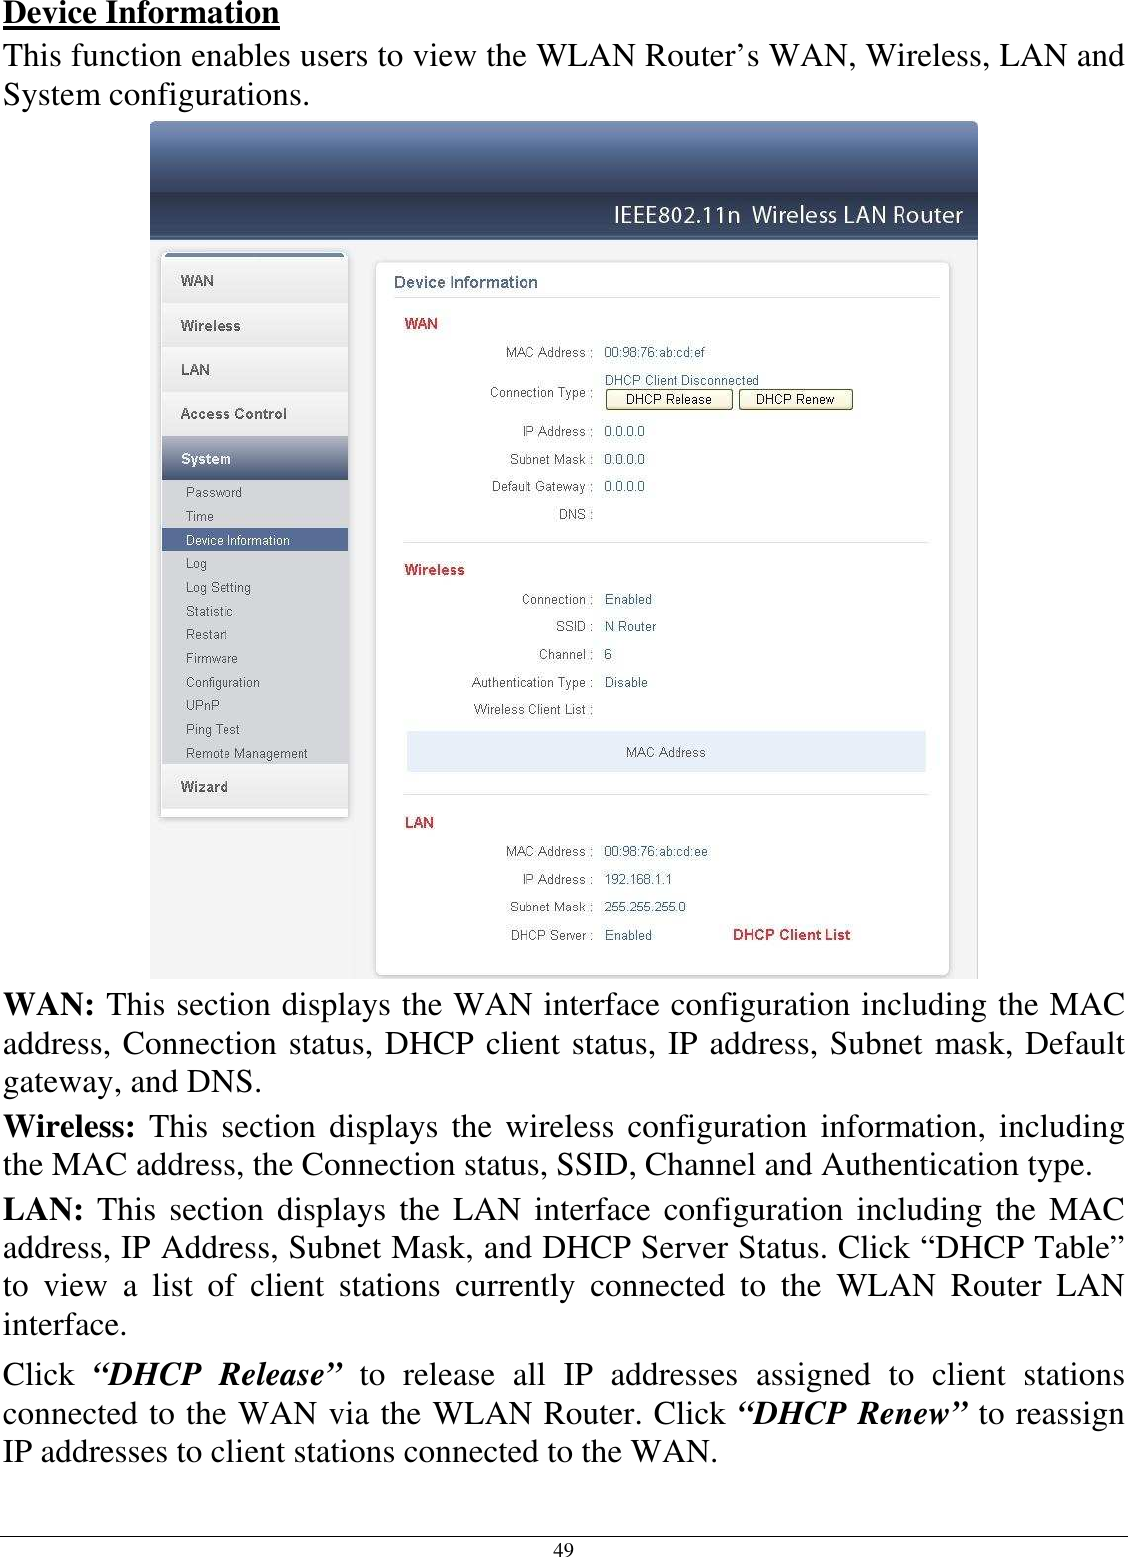 49 Device Information This function enables users to view the WLAN Router’s WAN, Wireless, LAN and System configurations.  WAN: This section displays the WAN interface configuration including the MAC address, Connection status, DHCP client status, IP address, Subnet mask, Default gateway, and DNS.  Wireless:  This section displays  the  wireless configuration information, including the MAC address, the Connection status, SSID, Channel and Authentication type. LAN: This section displays the LAN interface  configuration including  the  MAC address, IP Address, Subnet Mask, and DHCP Server Status. Click “DHCP Table” to  view  a  list  of  client  stations  currently  connected  to  the  WLAN  Router  LAN interface. Click  “DHCP  Release”  to  release  all  IP  addresses  assigned  to  client  stations connected to the WAN via the WLAN Router. Click “DHCP Renew” to reassign IP addresses to client stations connected to the WAN. 